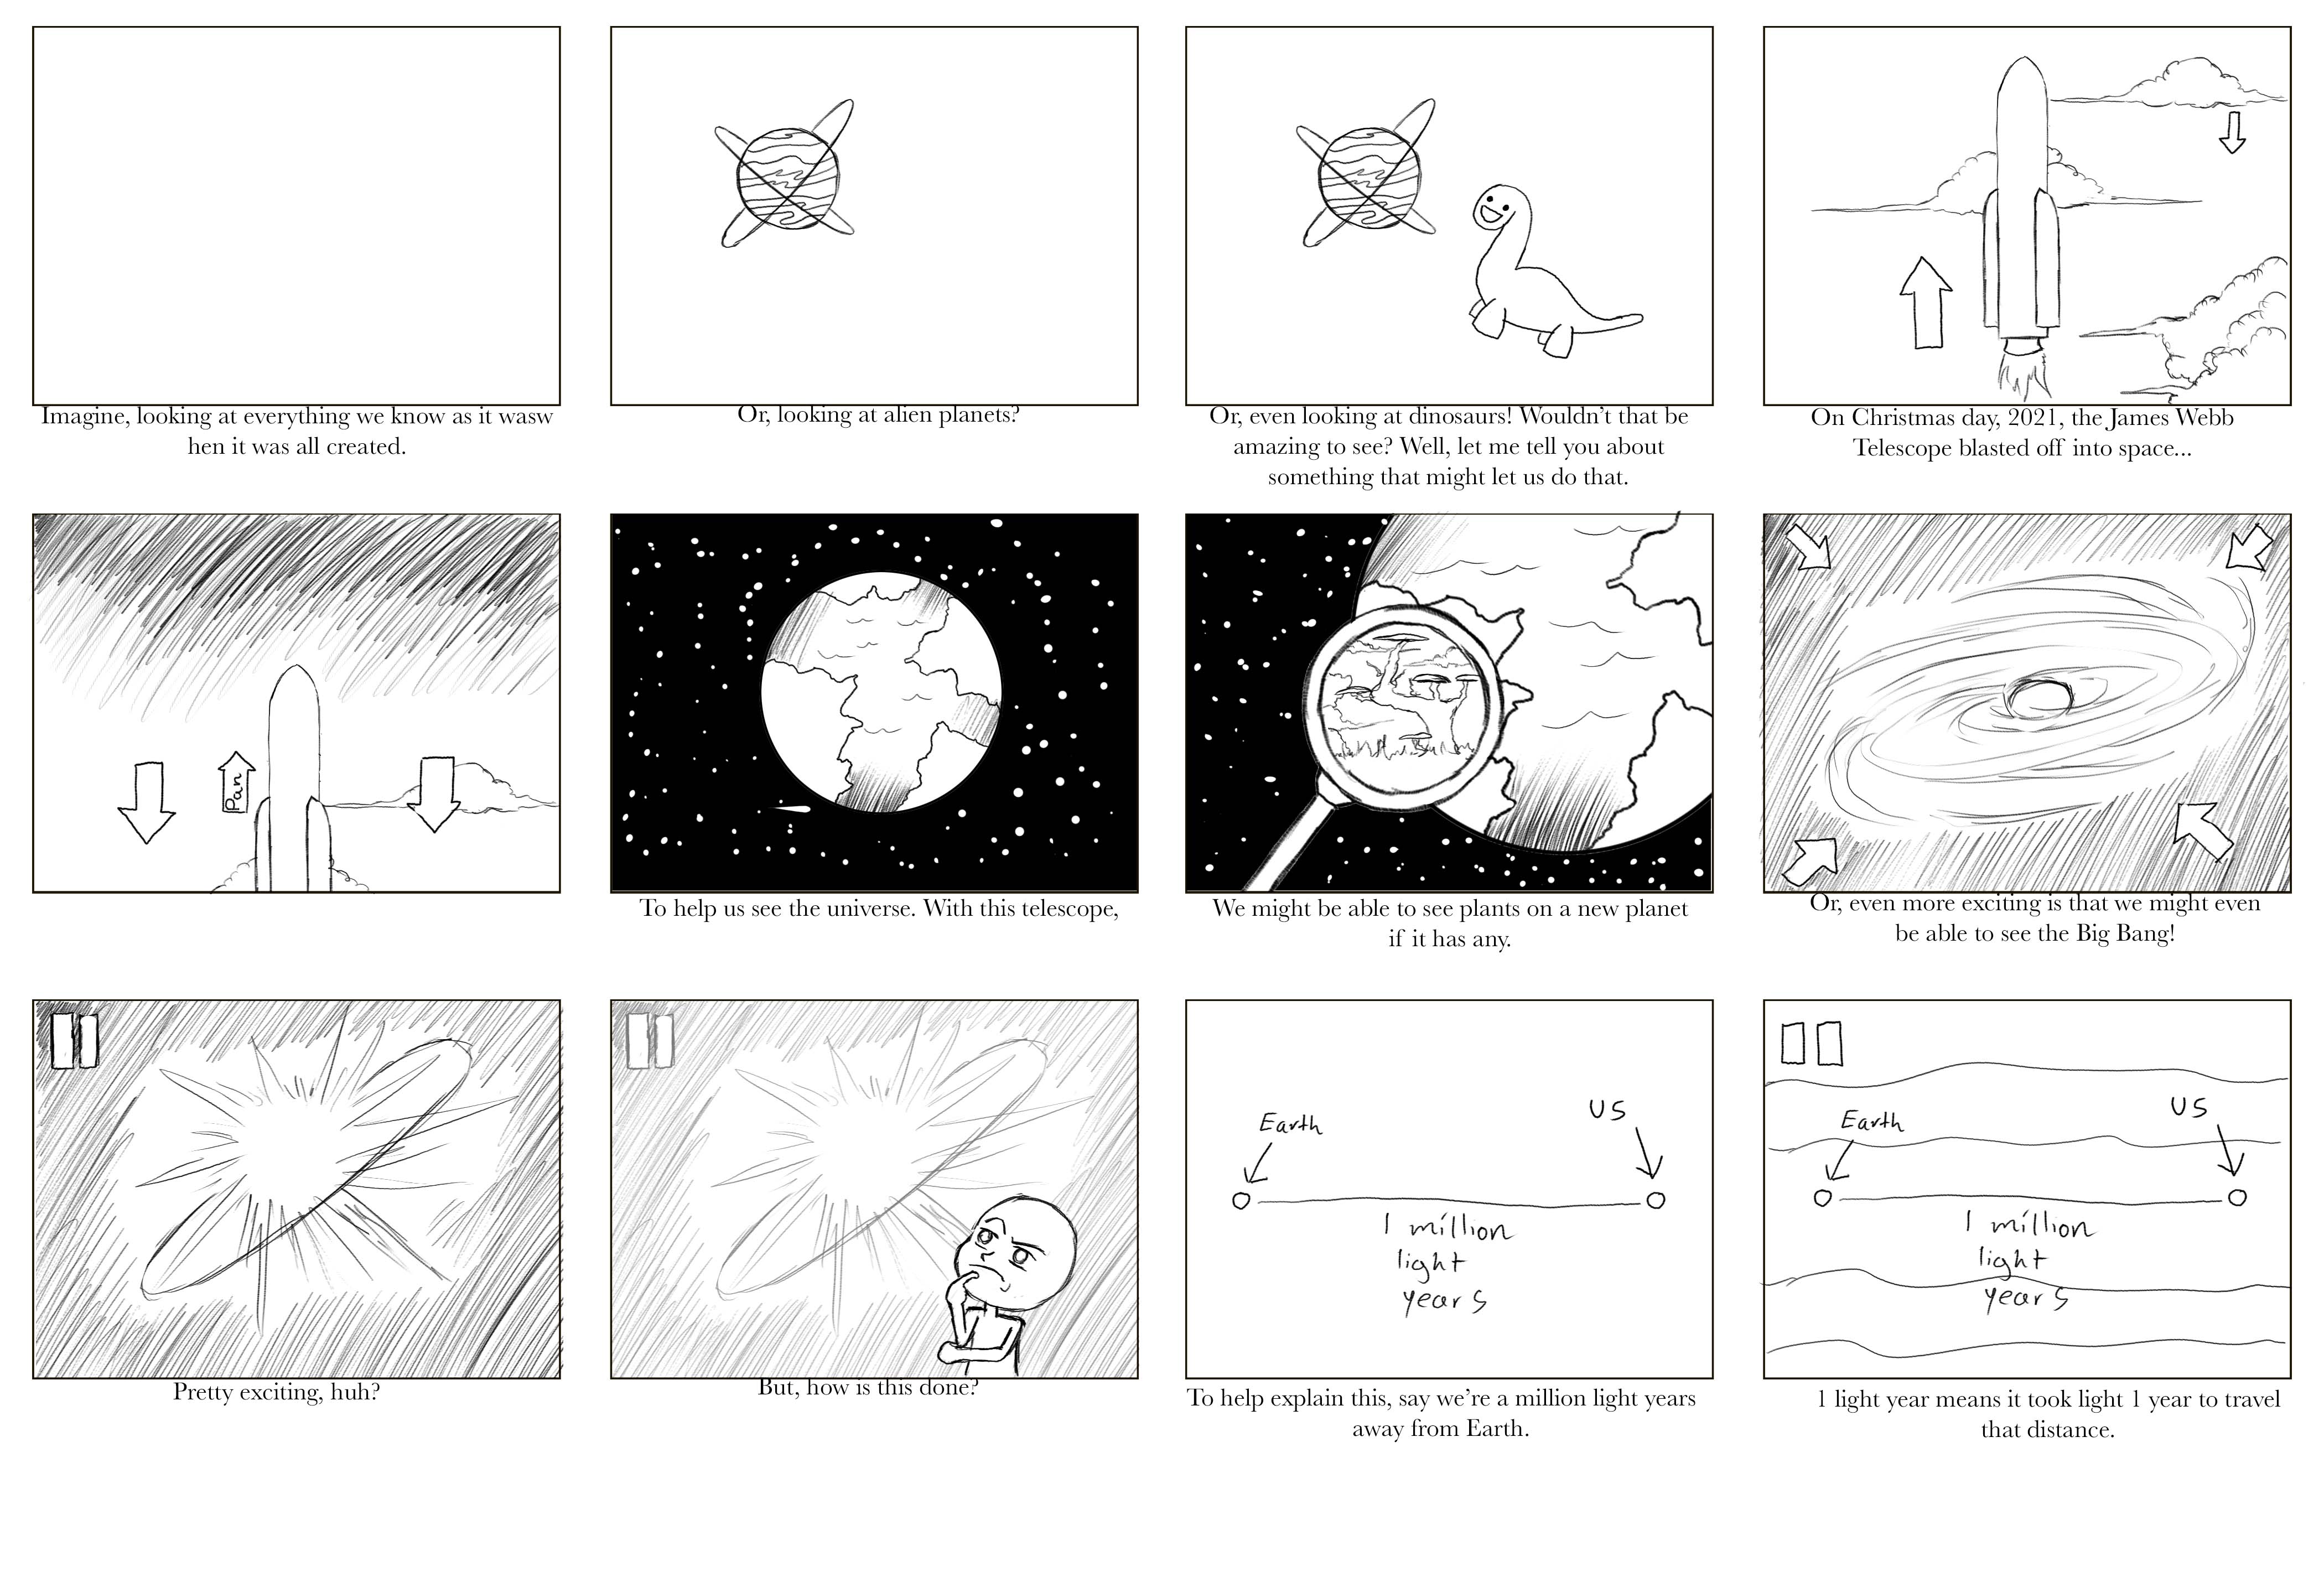 First page of James Webb Telescope storyboard